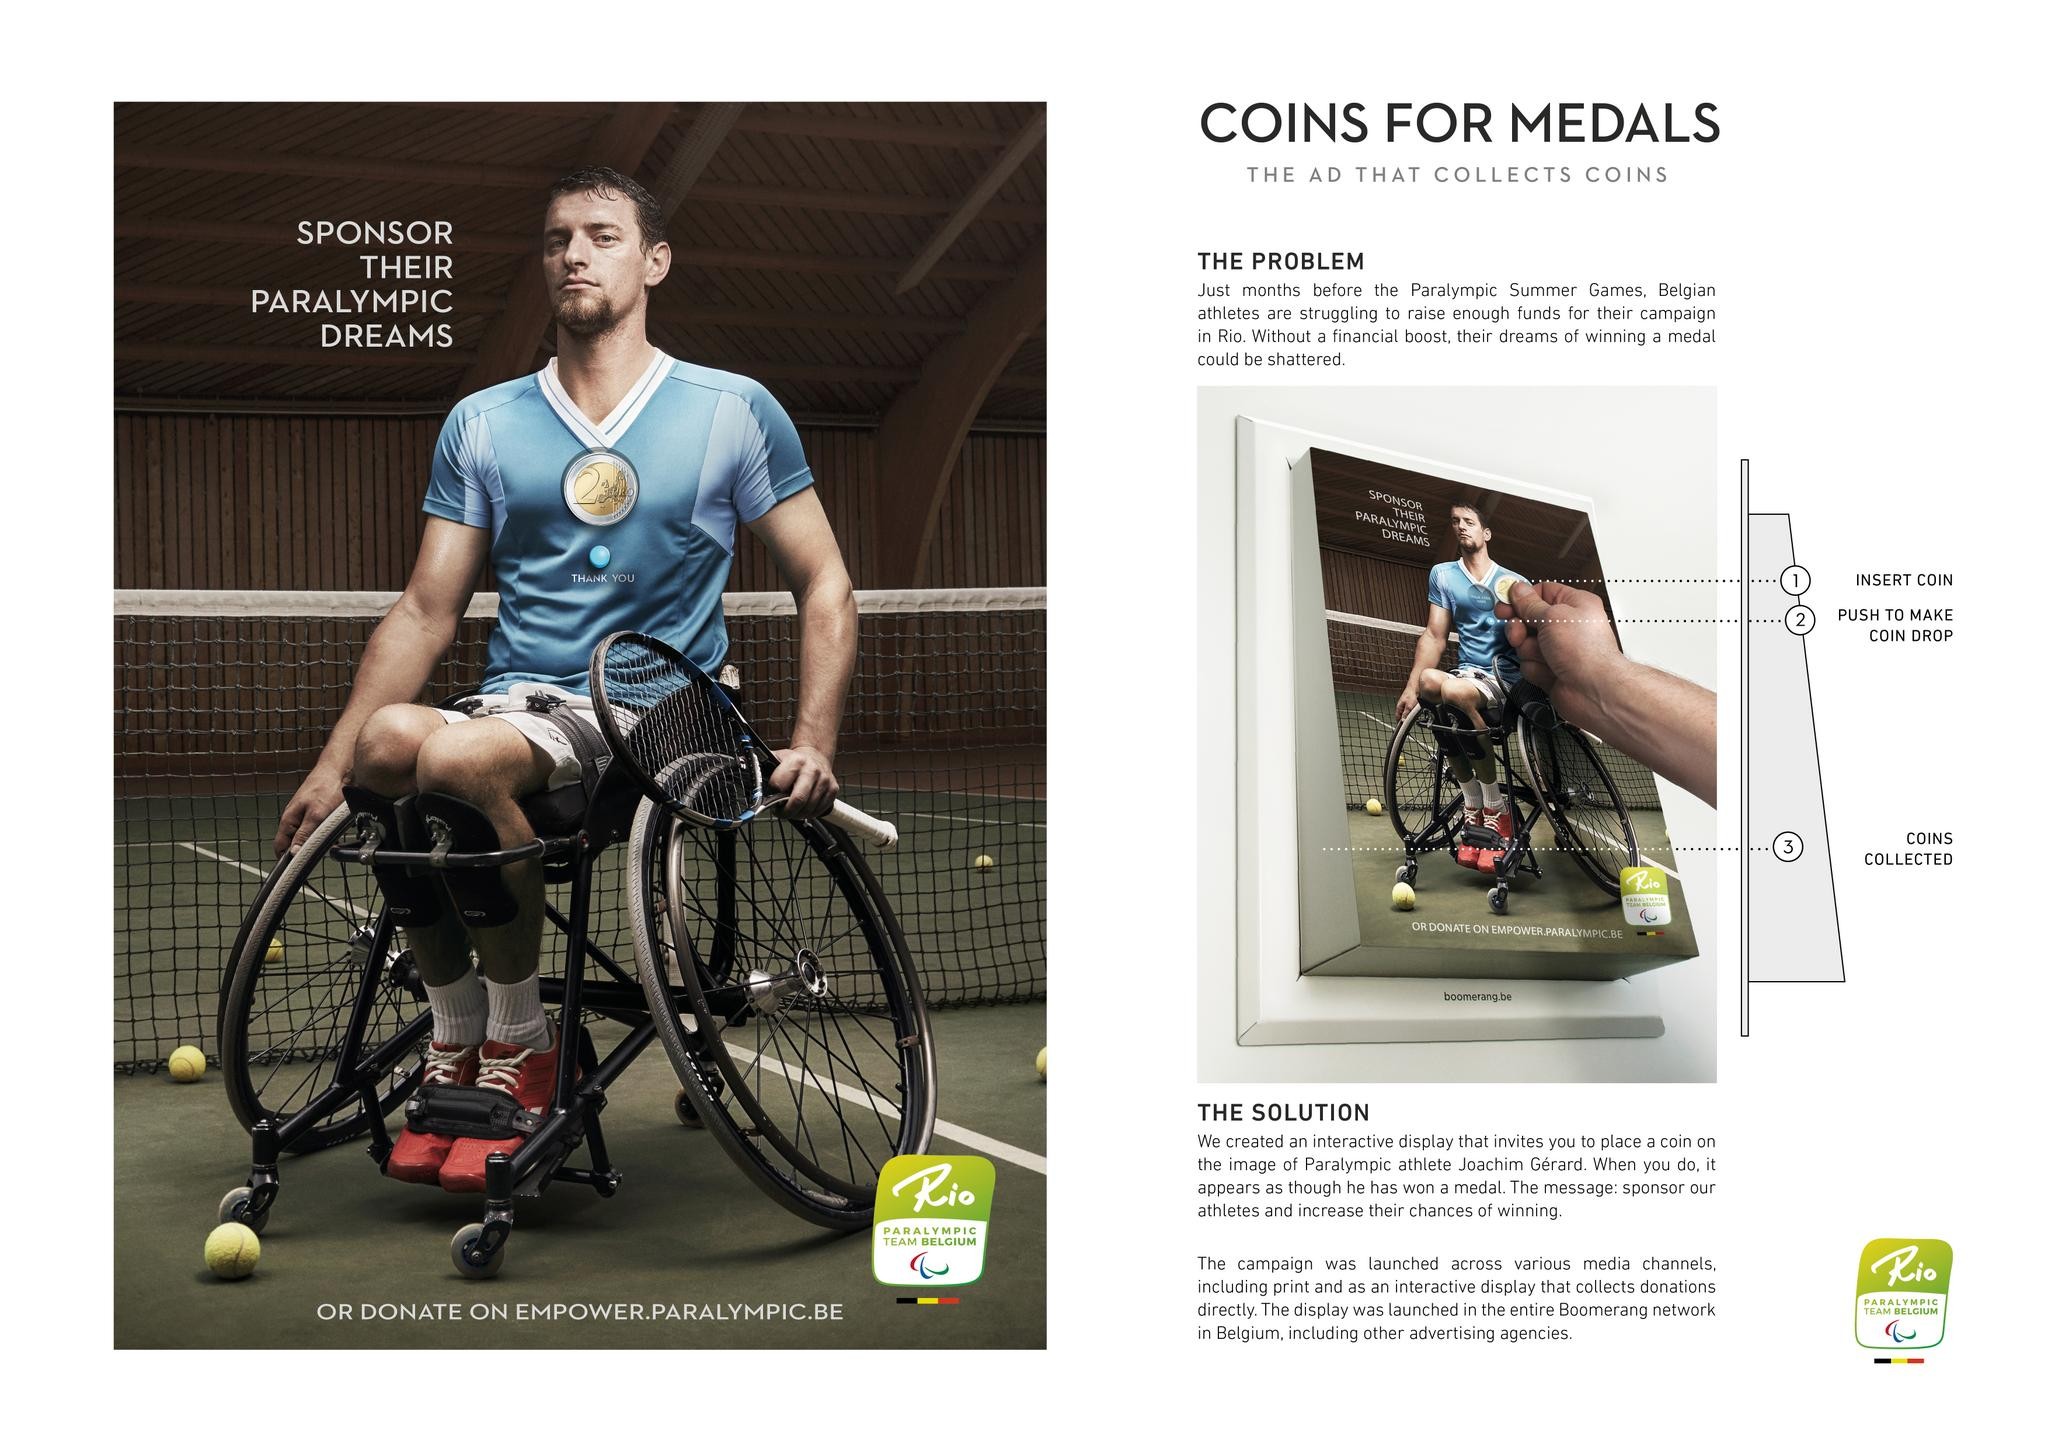 Coins for Medals